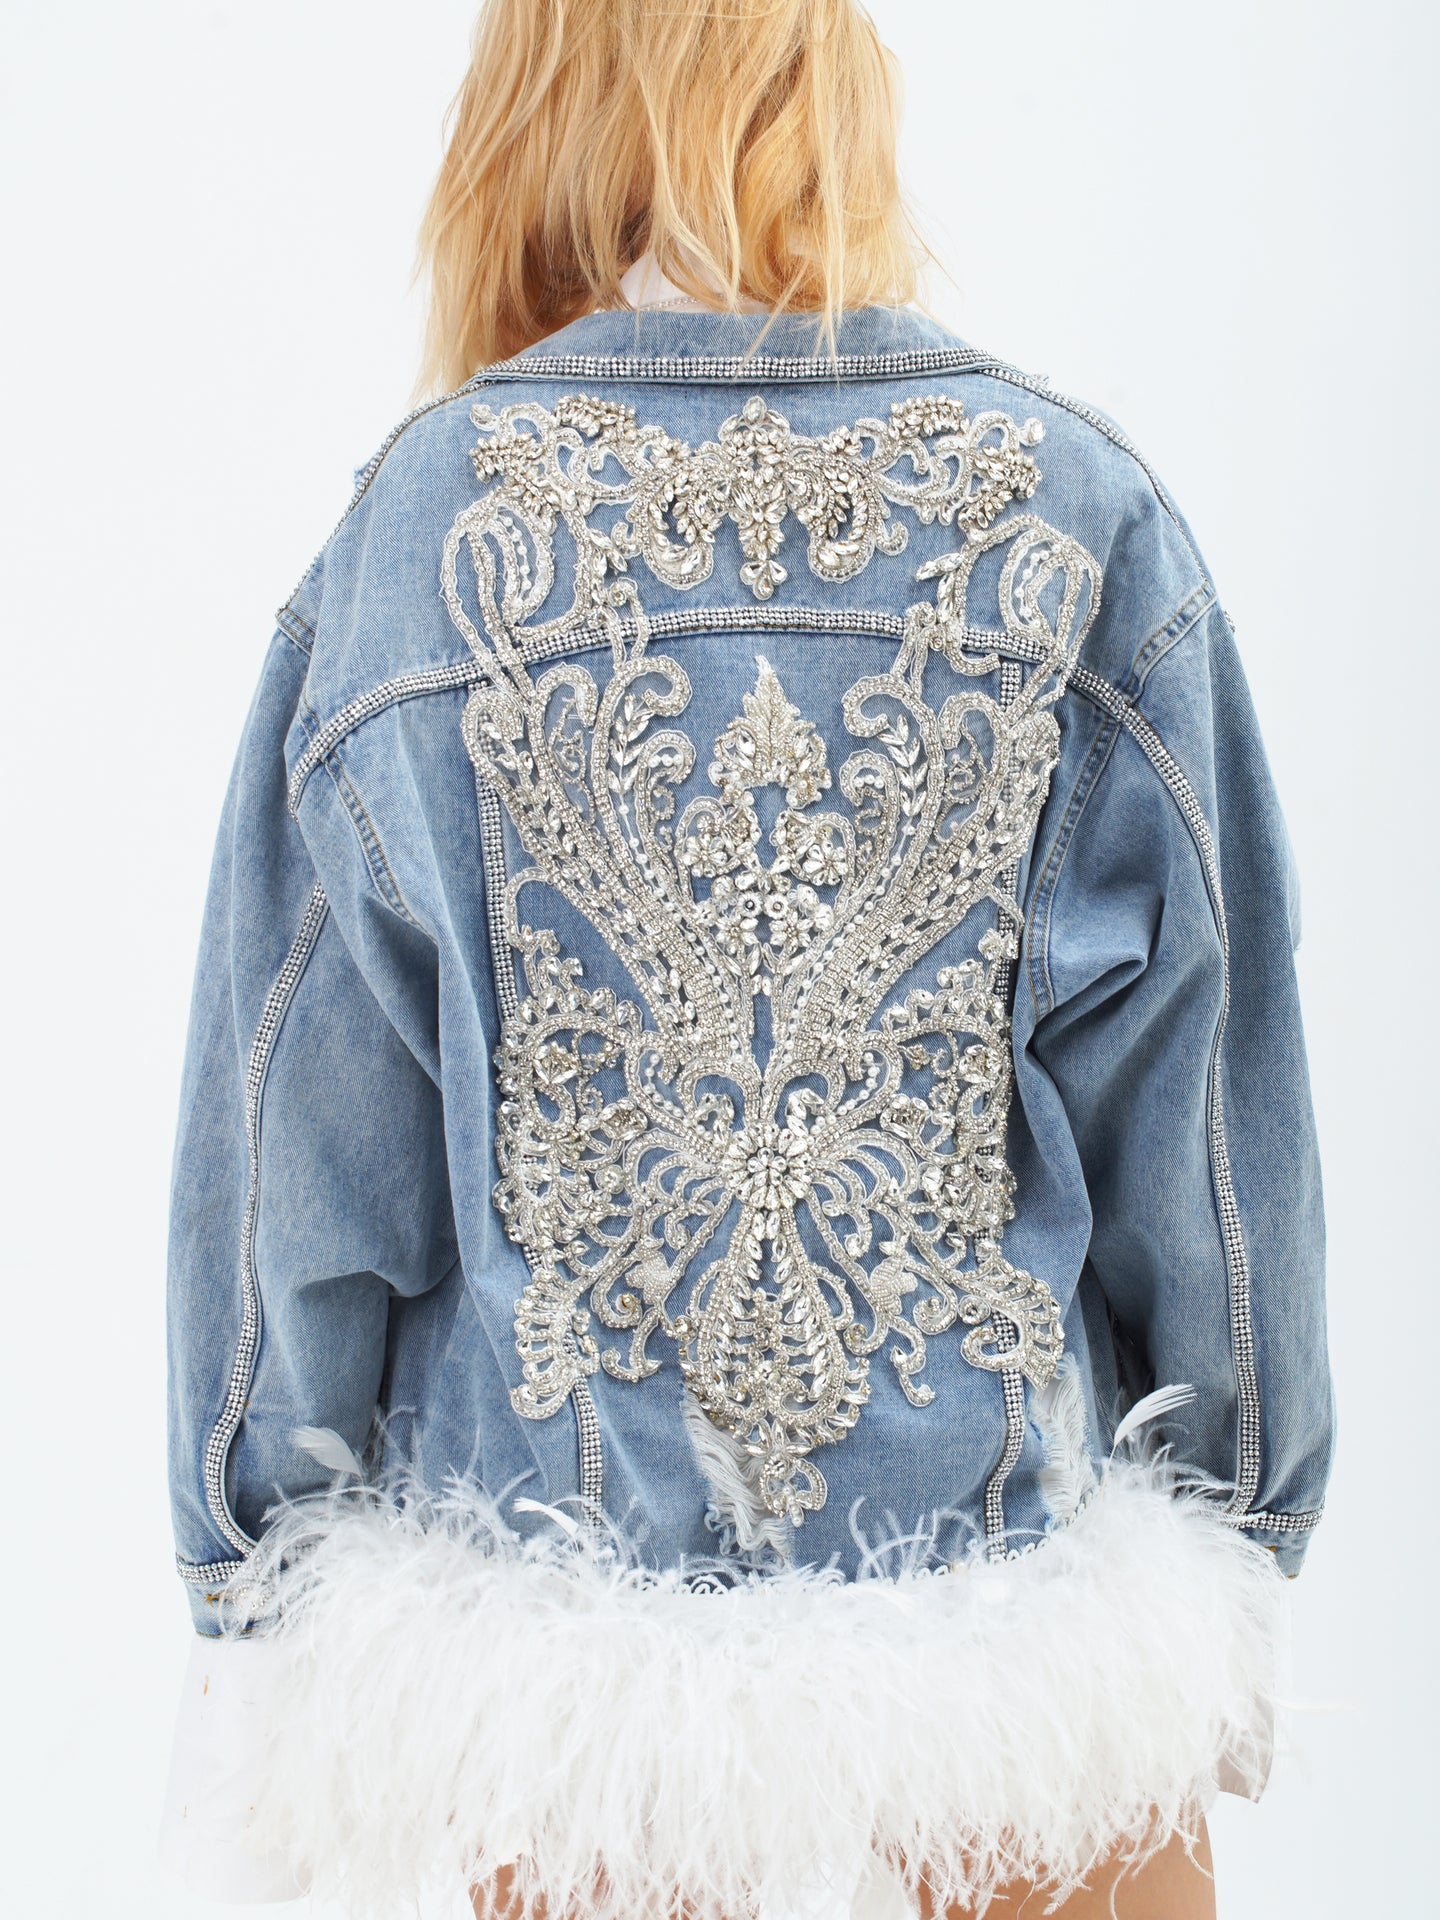 Hollywood Couture Denim Jacket by Morphine Fashion